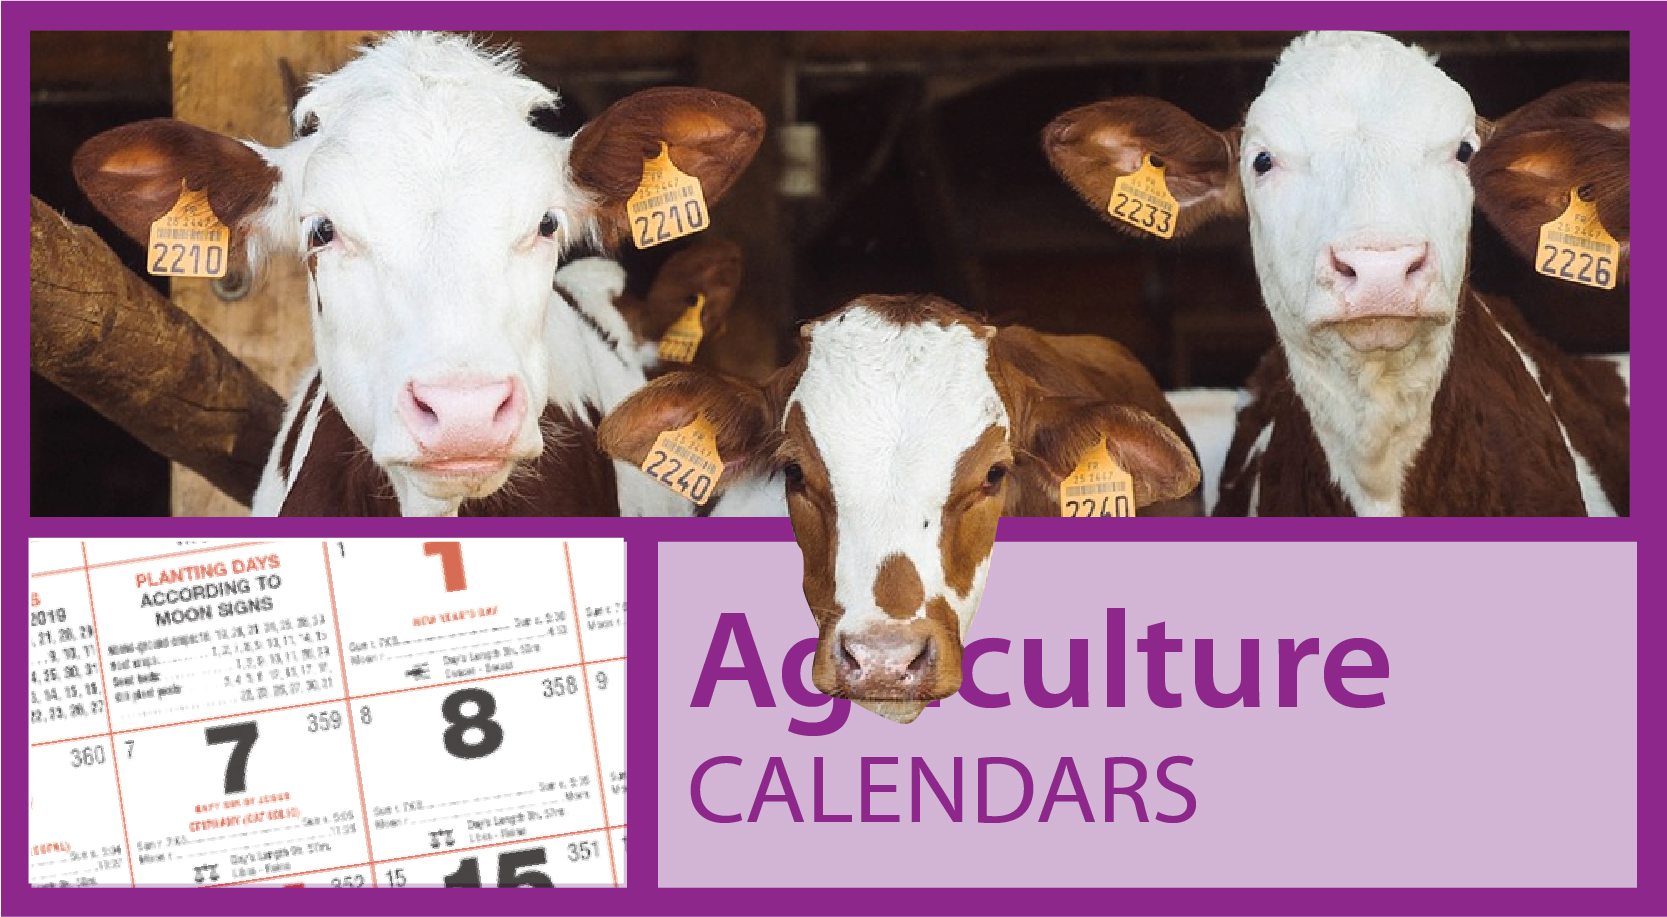 Promotional Agriculture Calendars https://www.valuecalendars.com/products/standard_imprinted_calendars/promotional_agriculture_calendars